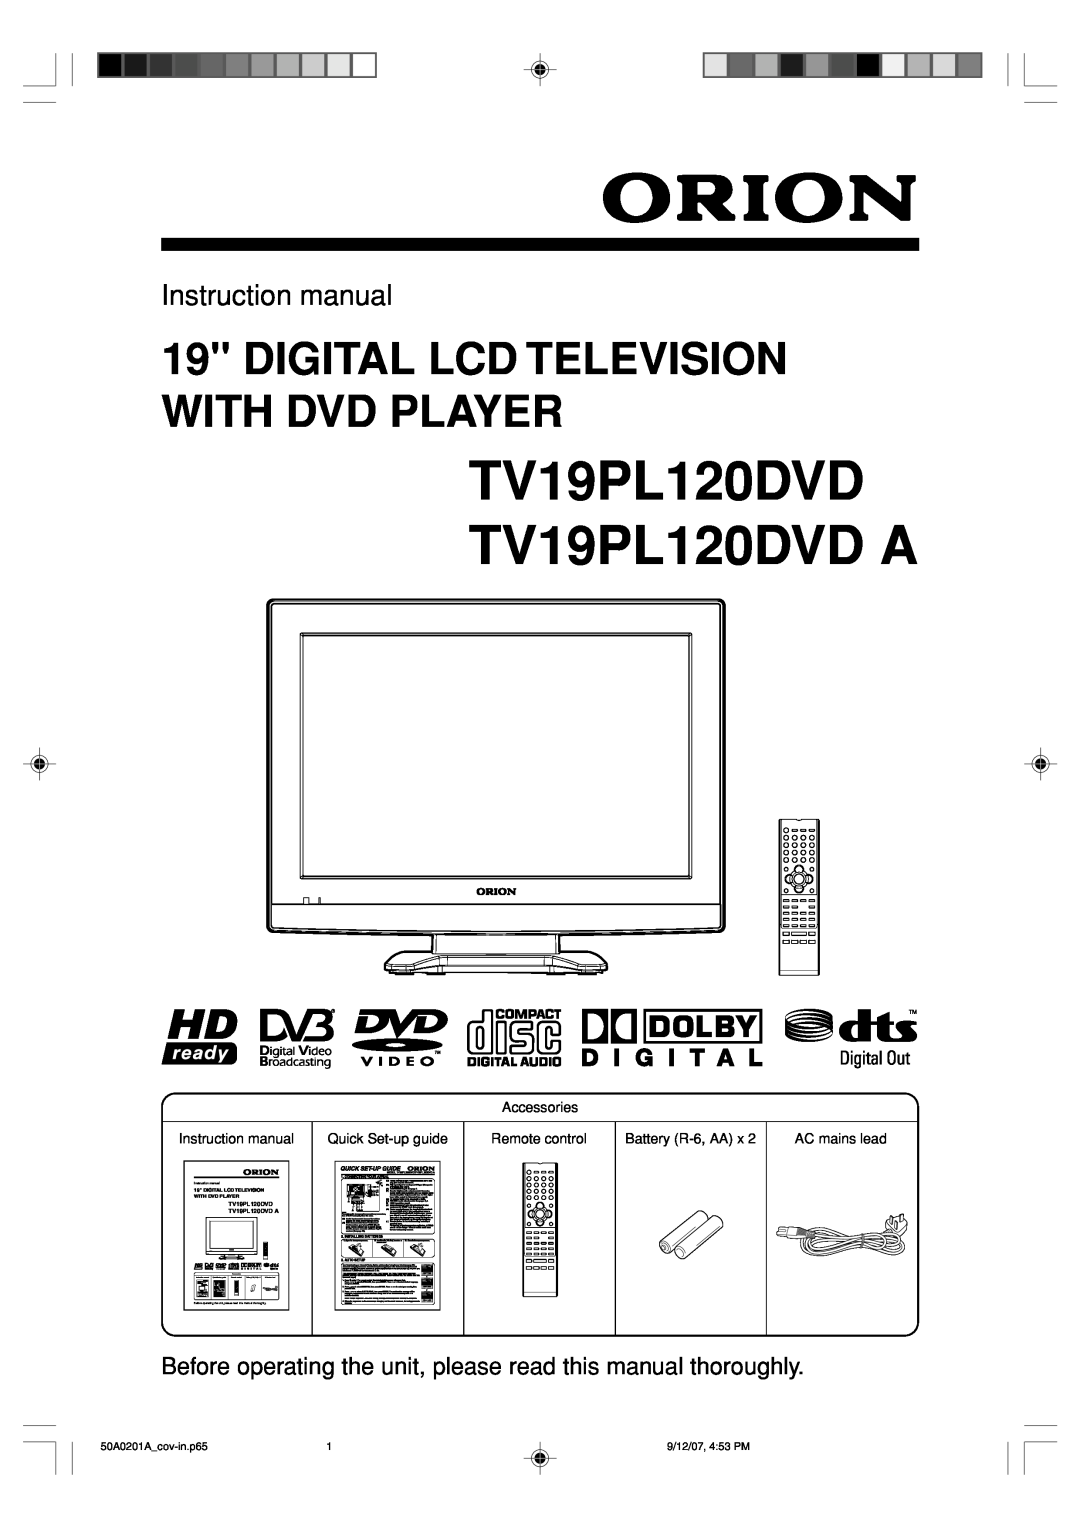 Sansui instruction manual TV19PL120DVD TV19PL120DVD A, Digital Lcd Television With Dvd Player, Instruction manual 